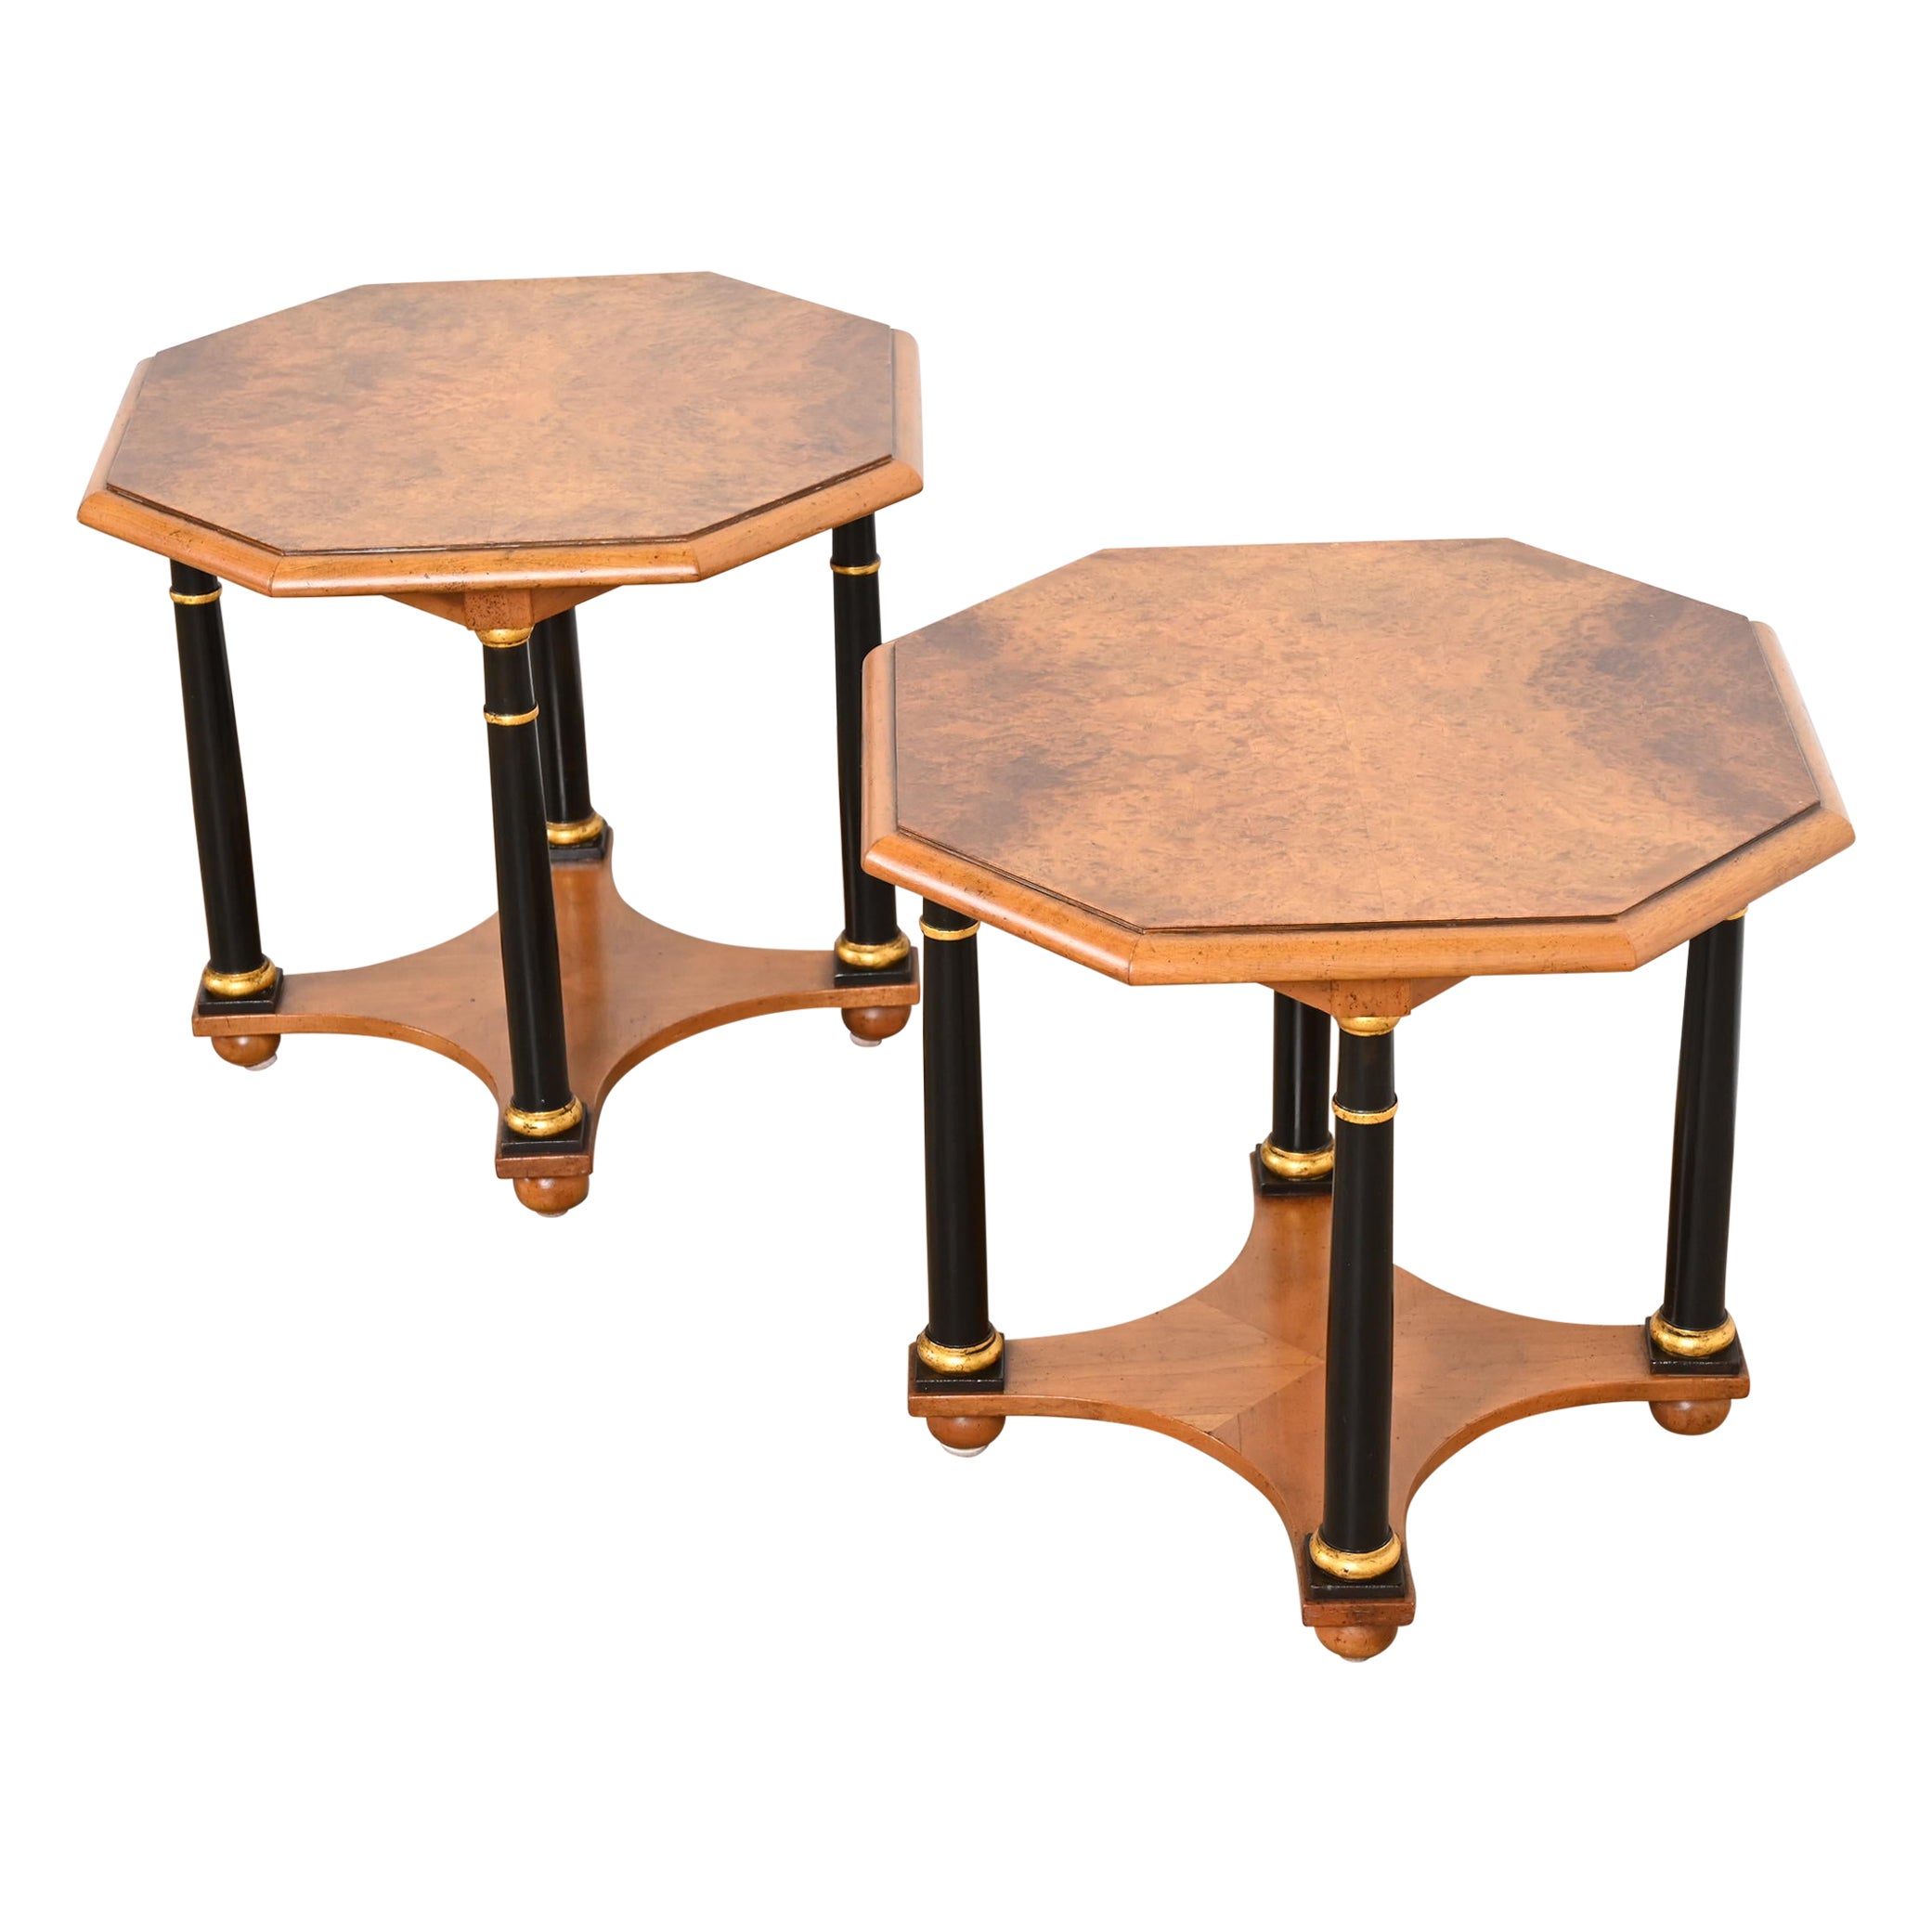 Baker Furniture Neoclassical Burled Walnut Tea Tables, Pair For Sale